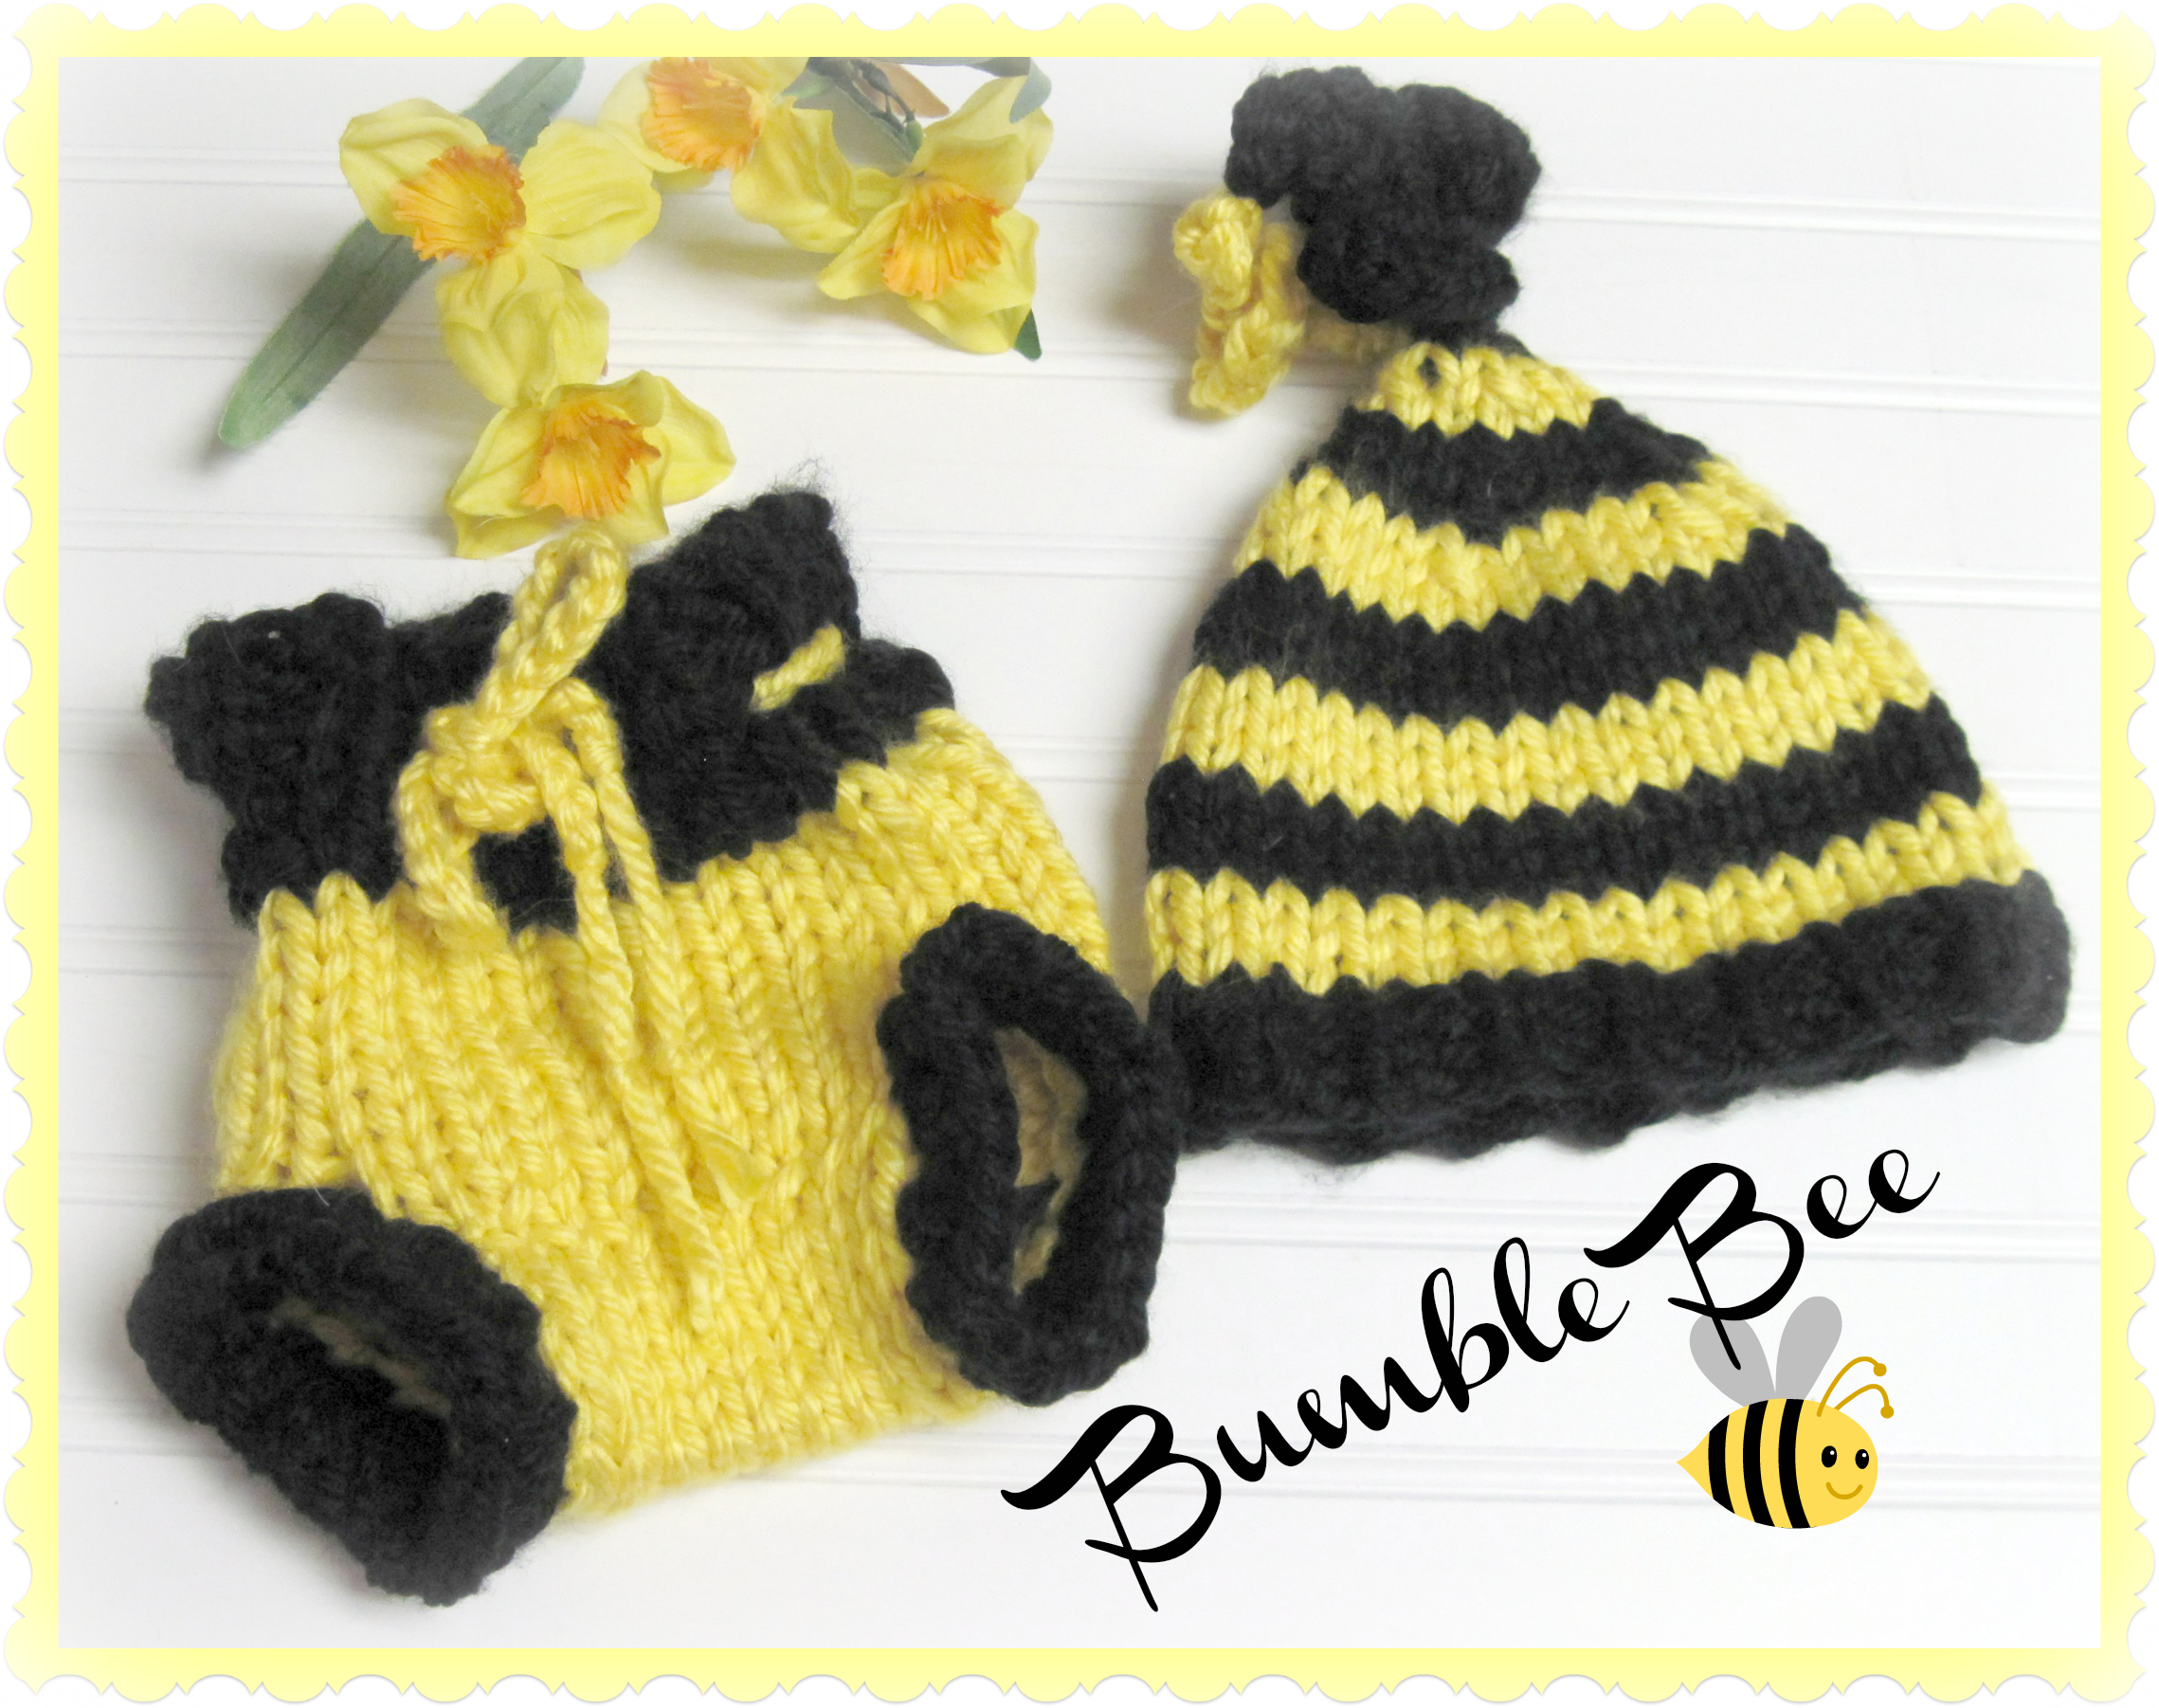 Bumble bee inspired hat and diaper cover